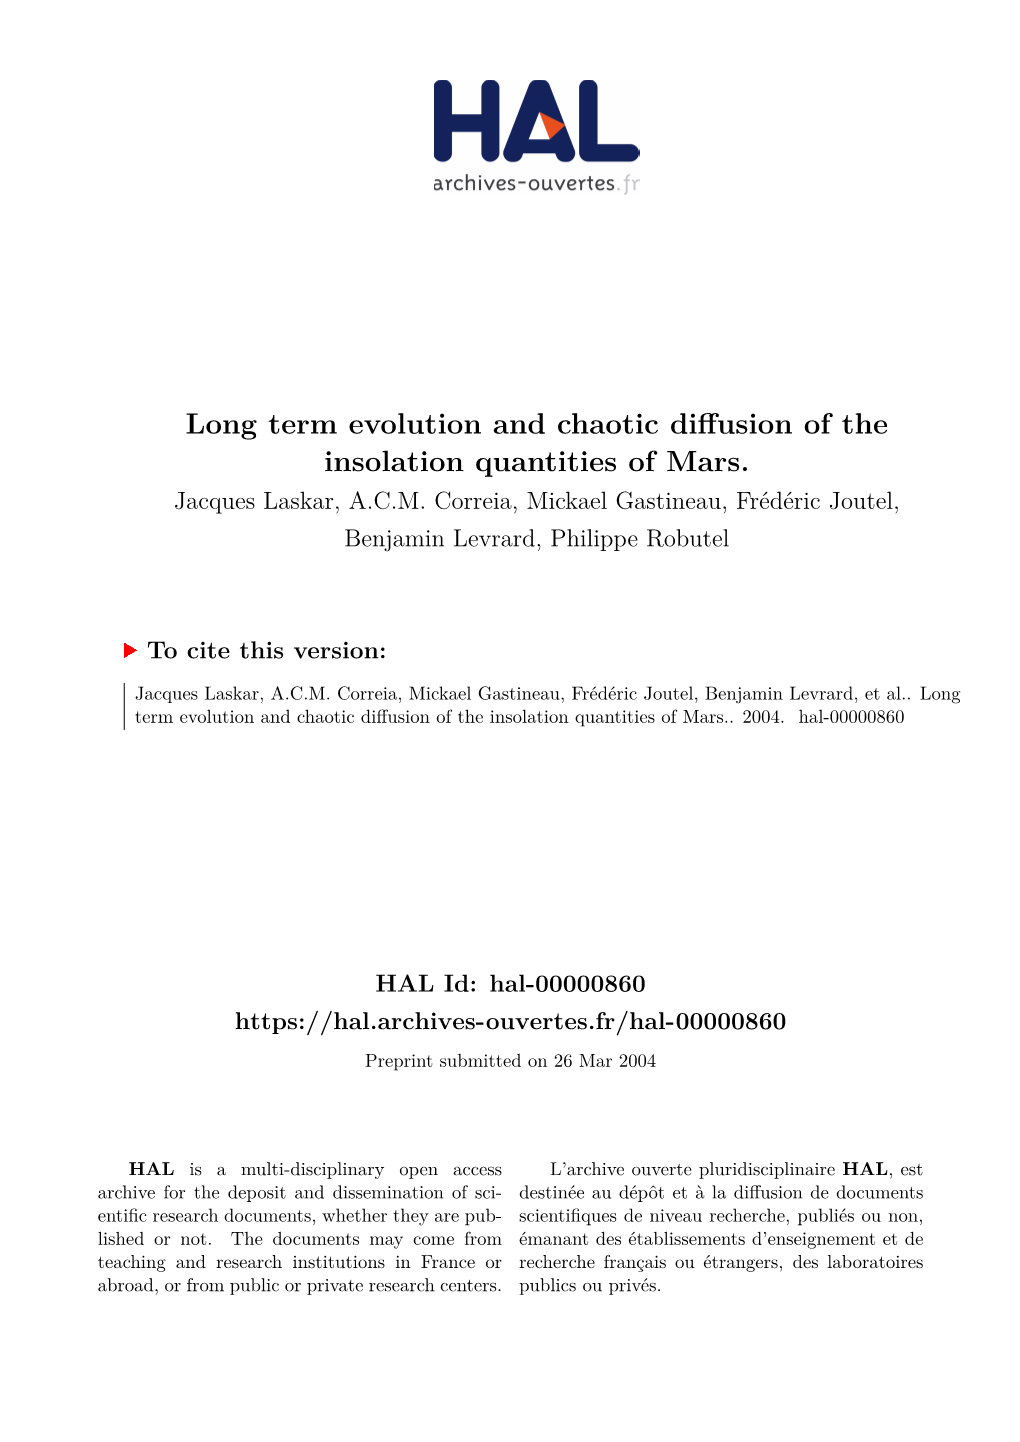 Long Term Evolution and Chaotic Diffusion of the Insolation Quantities of Mars. Jacques Laskar, A.C.M